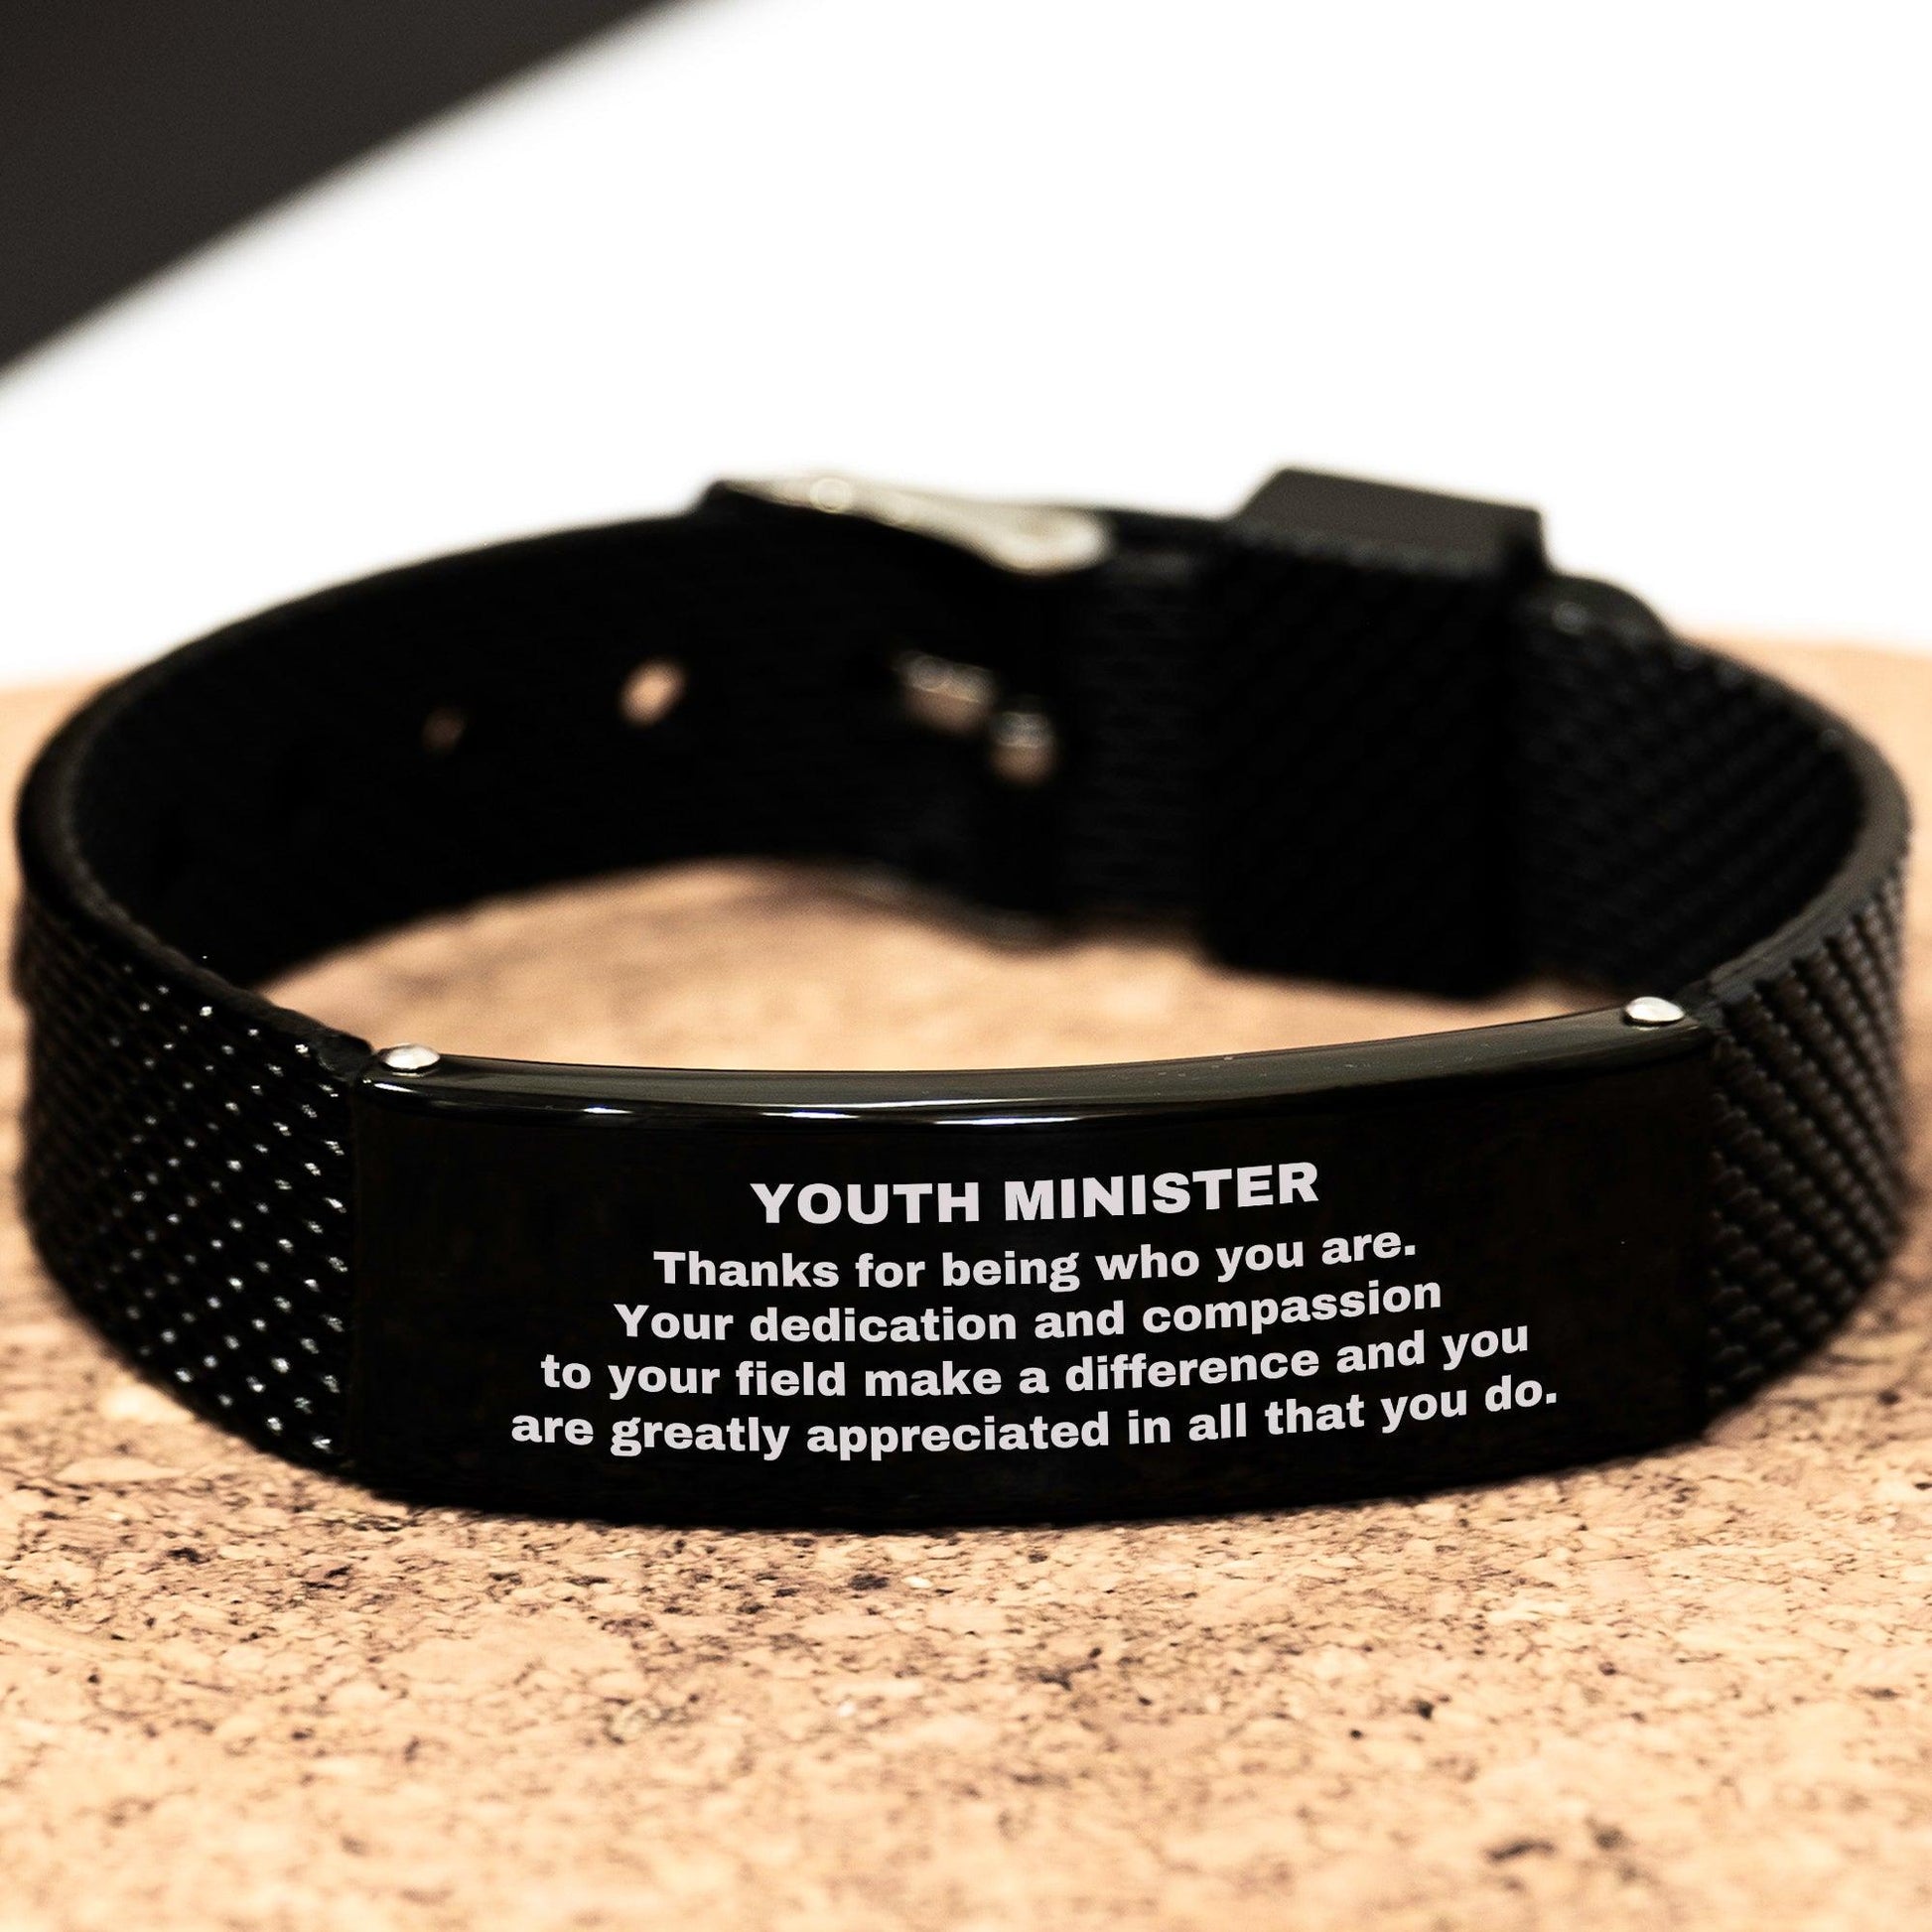 Youth Minister Black Glidelock Clasp Engraved Bracelet - Thanks for being who you are - Birthday Christmas Jewelry Gifts Coworkers Colleague Boss - Mallard Moon Gift Shop